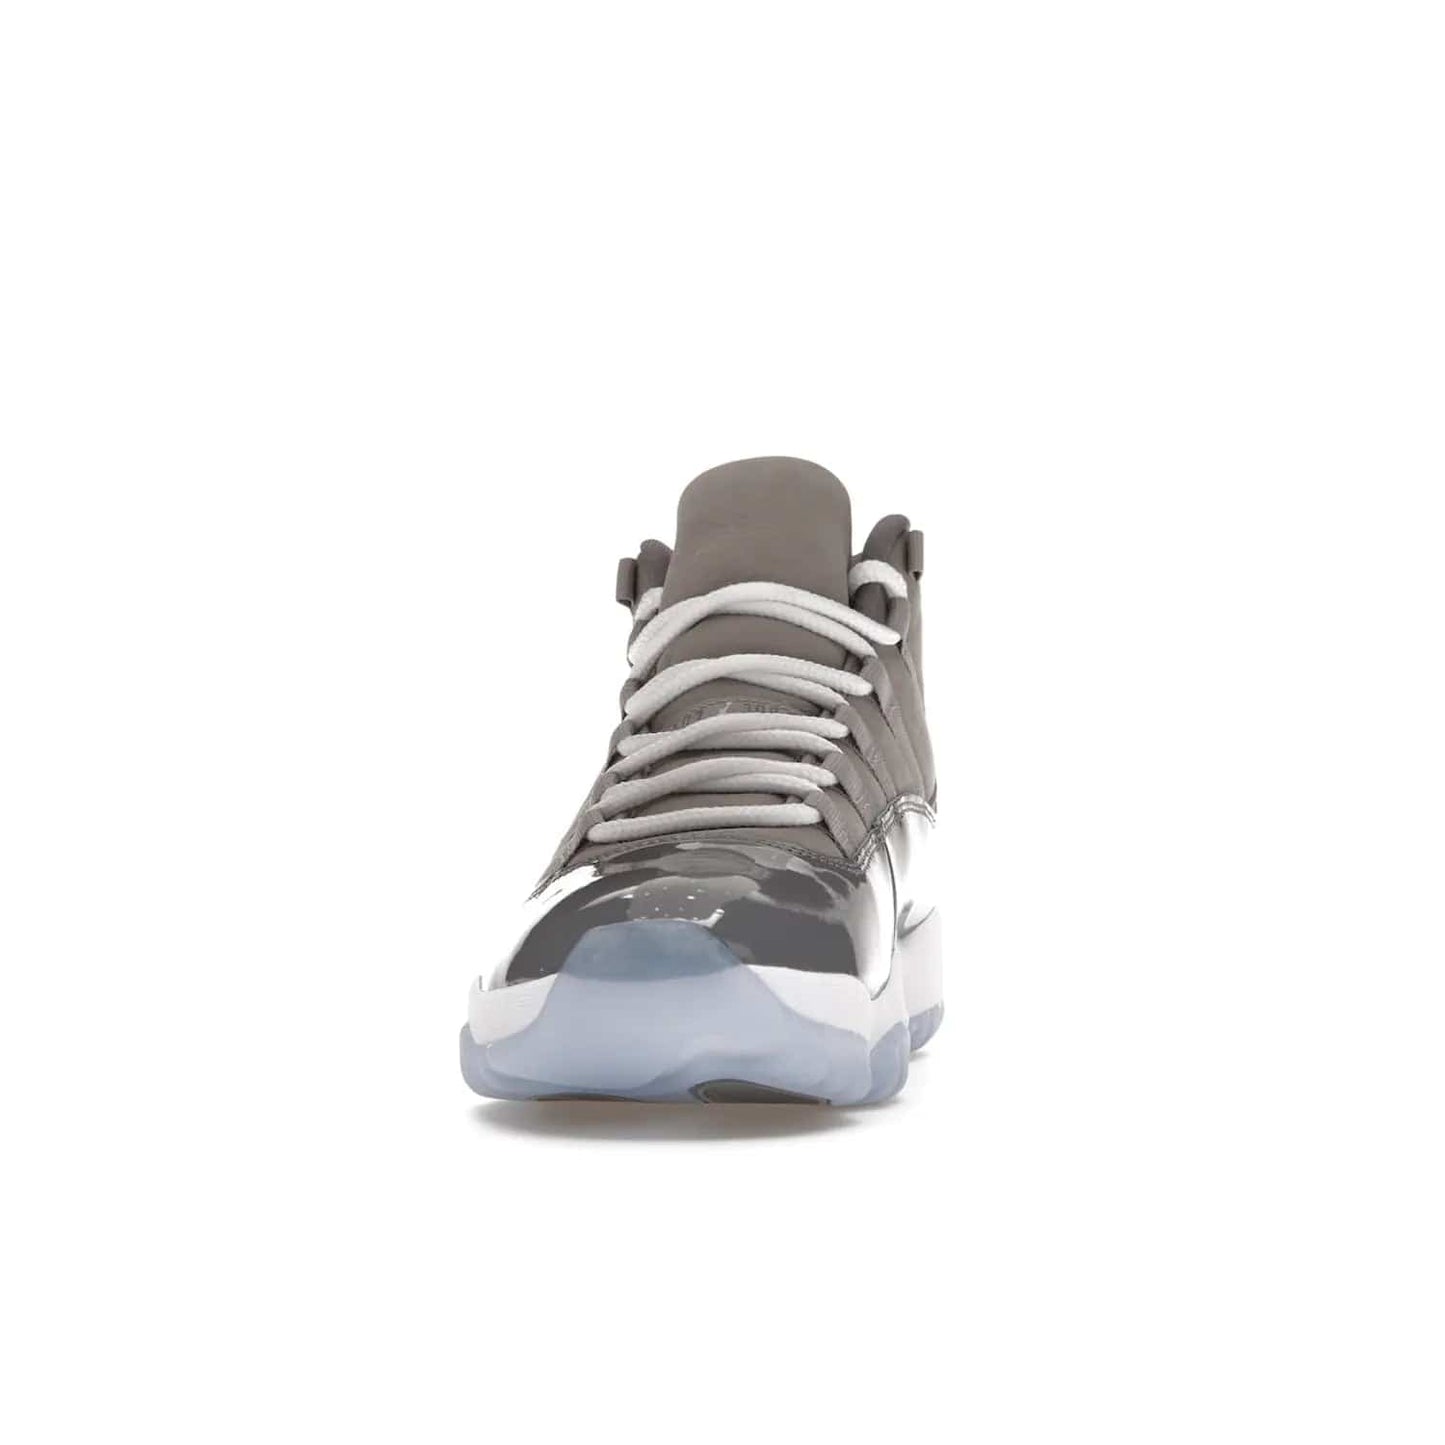 Jordan 11 Retro Cool Grey (2021) - Image 11 - Only at www.BallersClubKickz.com - Shop the Air Jordan 11 Retro Cool Grey (2021) for a must-have sneaker with a Cool Grey Durabuck upper, patent leather overlays, signature Jumpman embroidery, a white midsole, icy blue translucent outsole, and Multi-Color accents.  Released in December 2021 for $225.